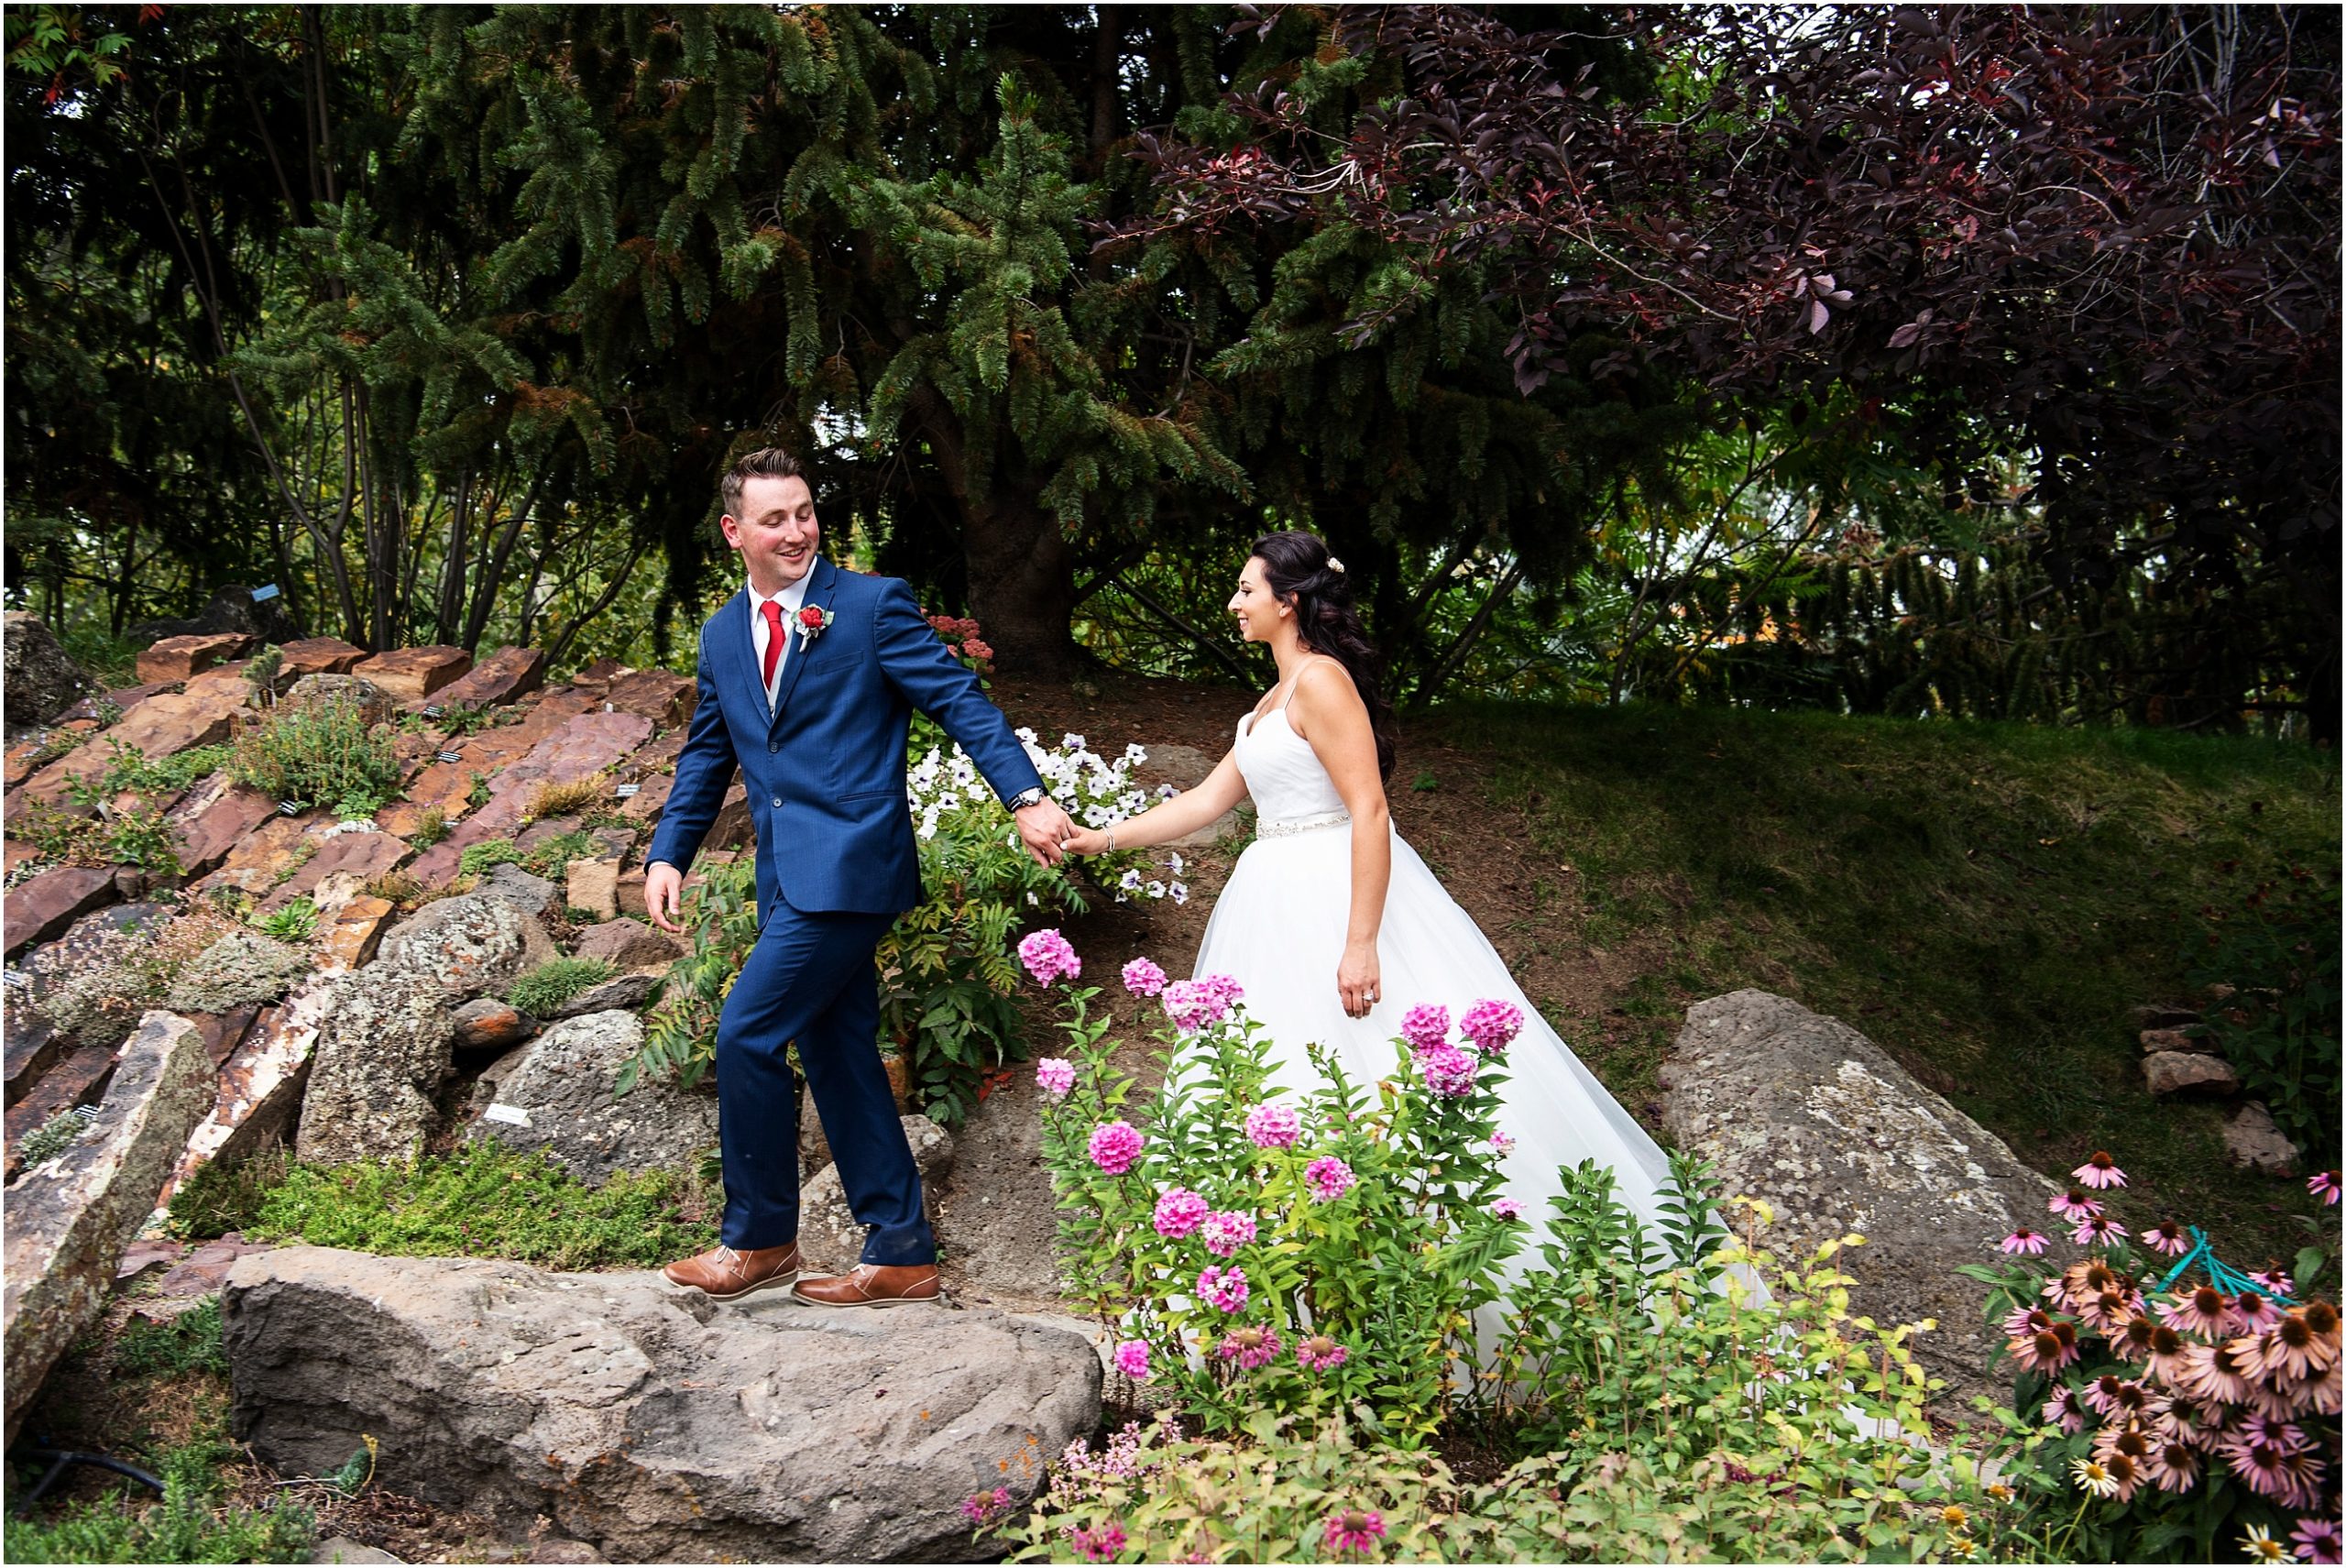 Beautiful wooded outdoor wedding photo complete with wildflowers Steamboat Colorado